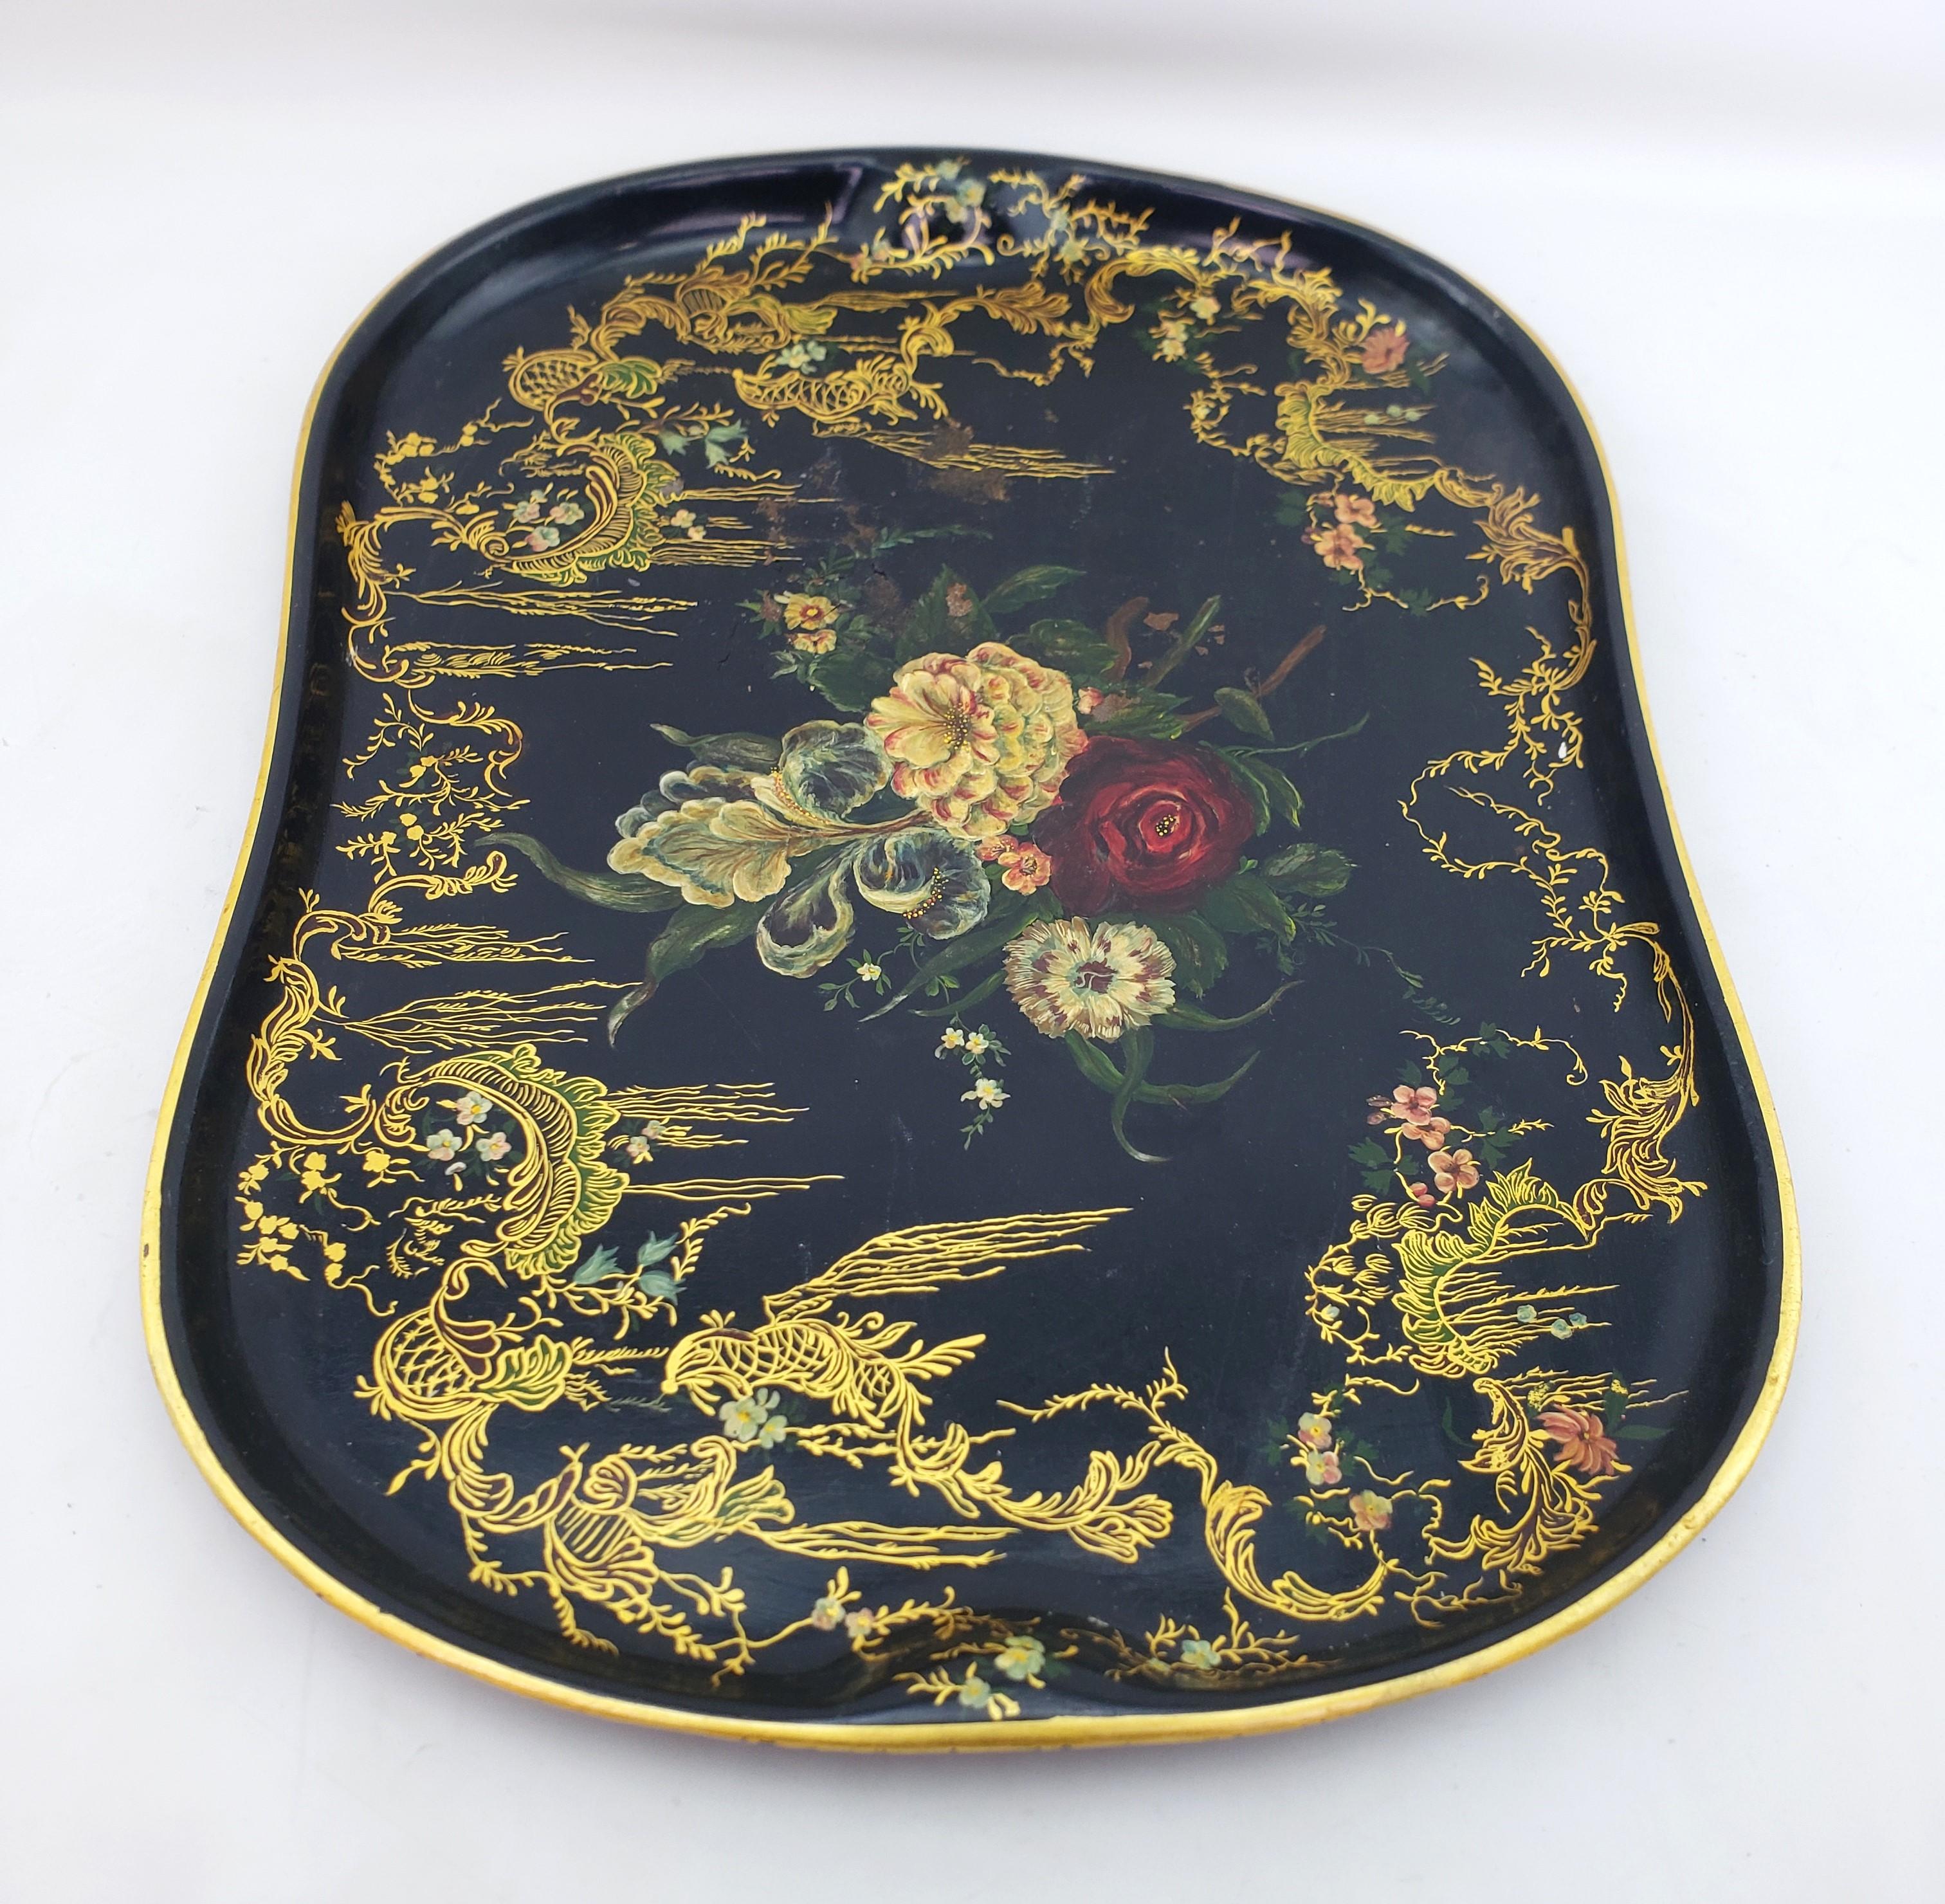 English Large Antique Toleware Serving Tray with Floral Decoration & Gilt Accents For Sale